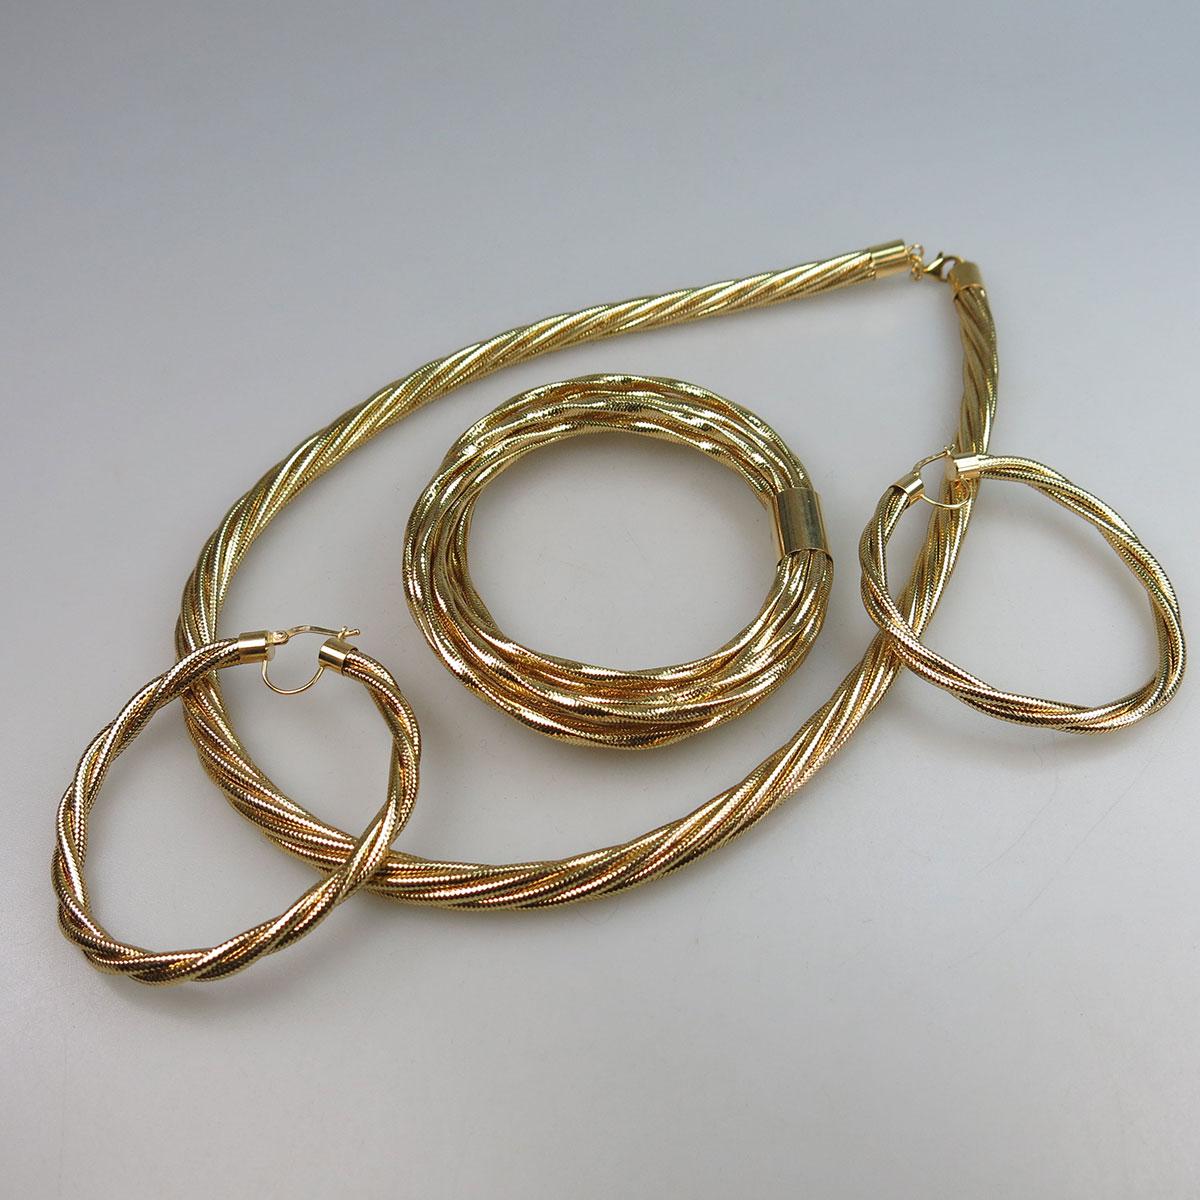 Woven 14k Yellow Gold Necklace, Bangle And Earrings